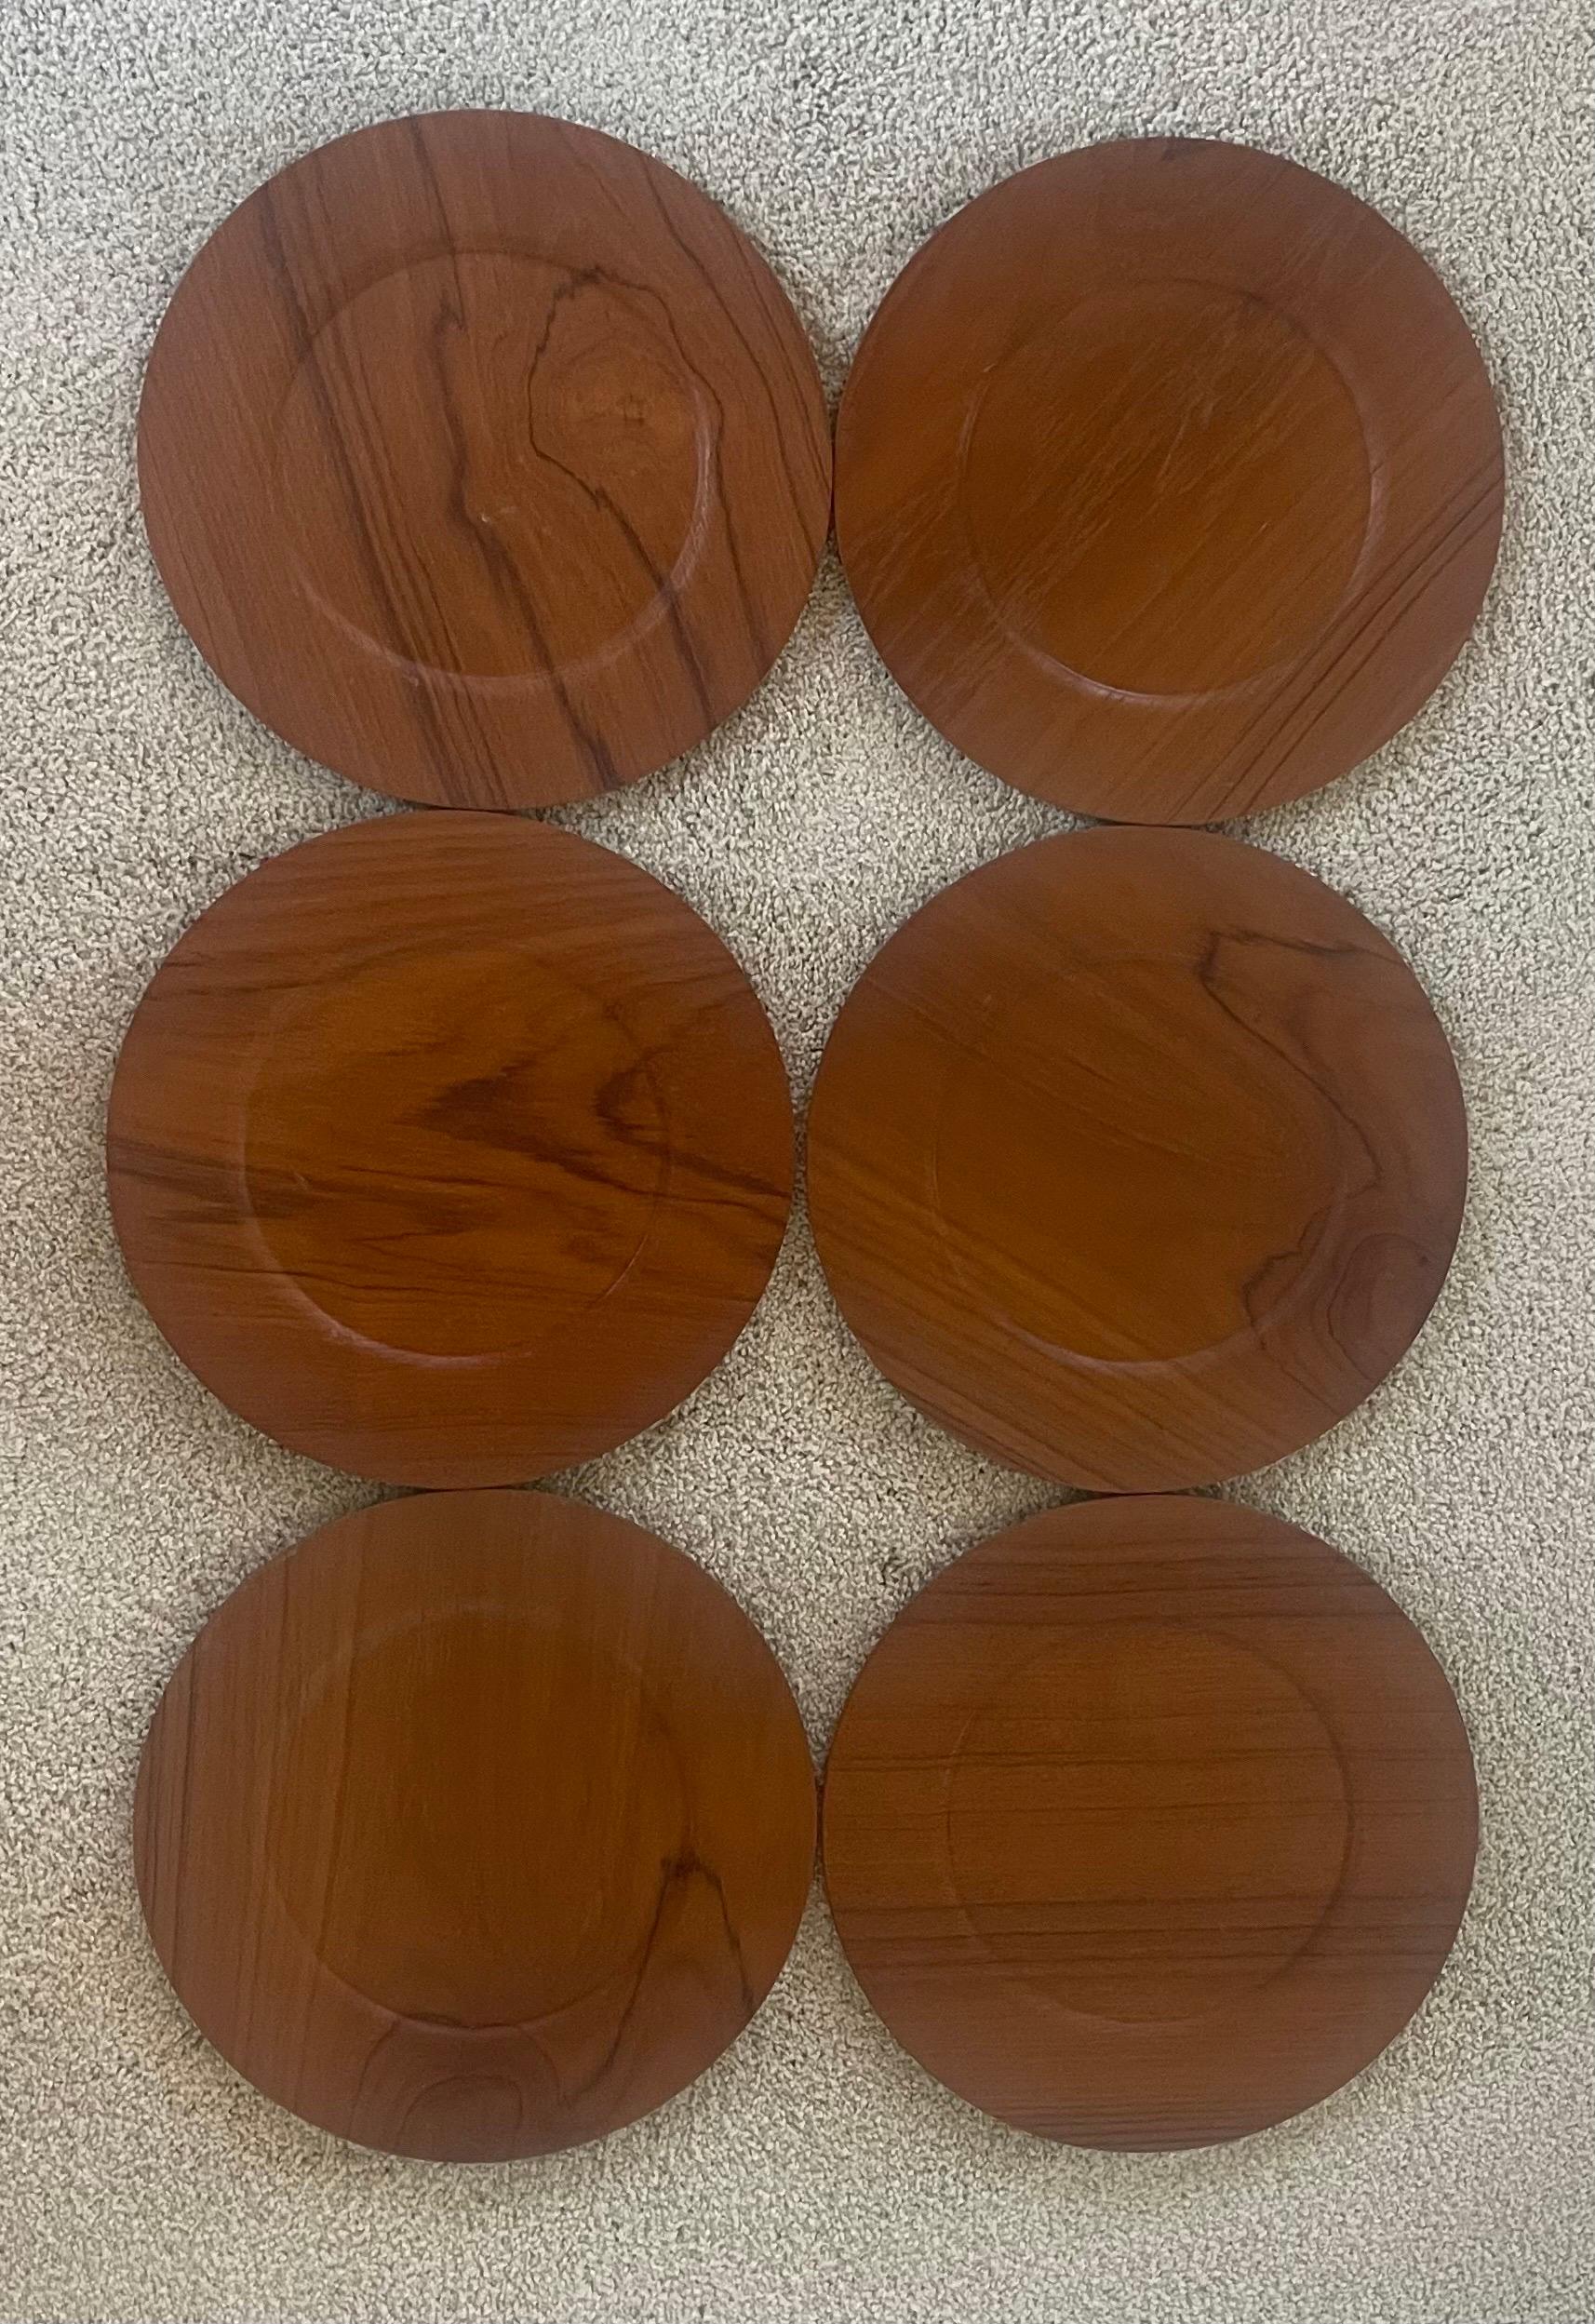 Set of Six Danish Modern Teak Plates / Chargers by Morsbak In Good Condition For Sale In San Diego, CA